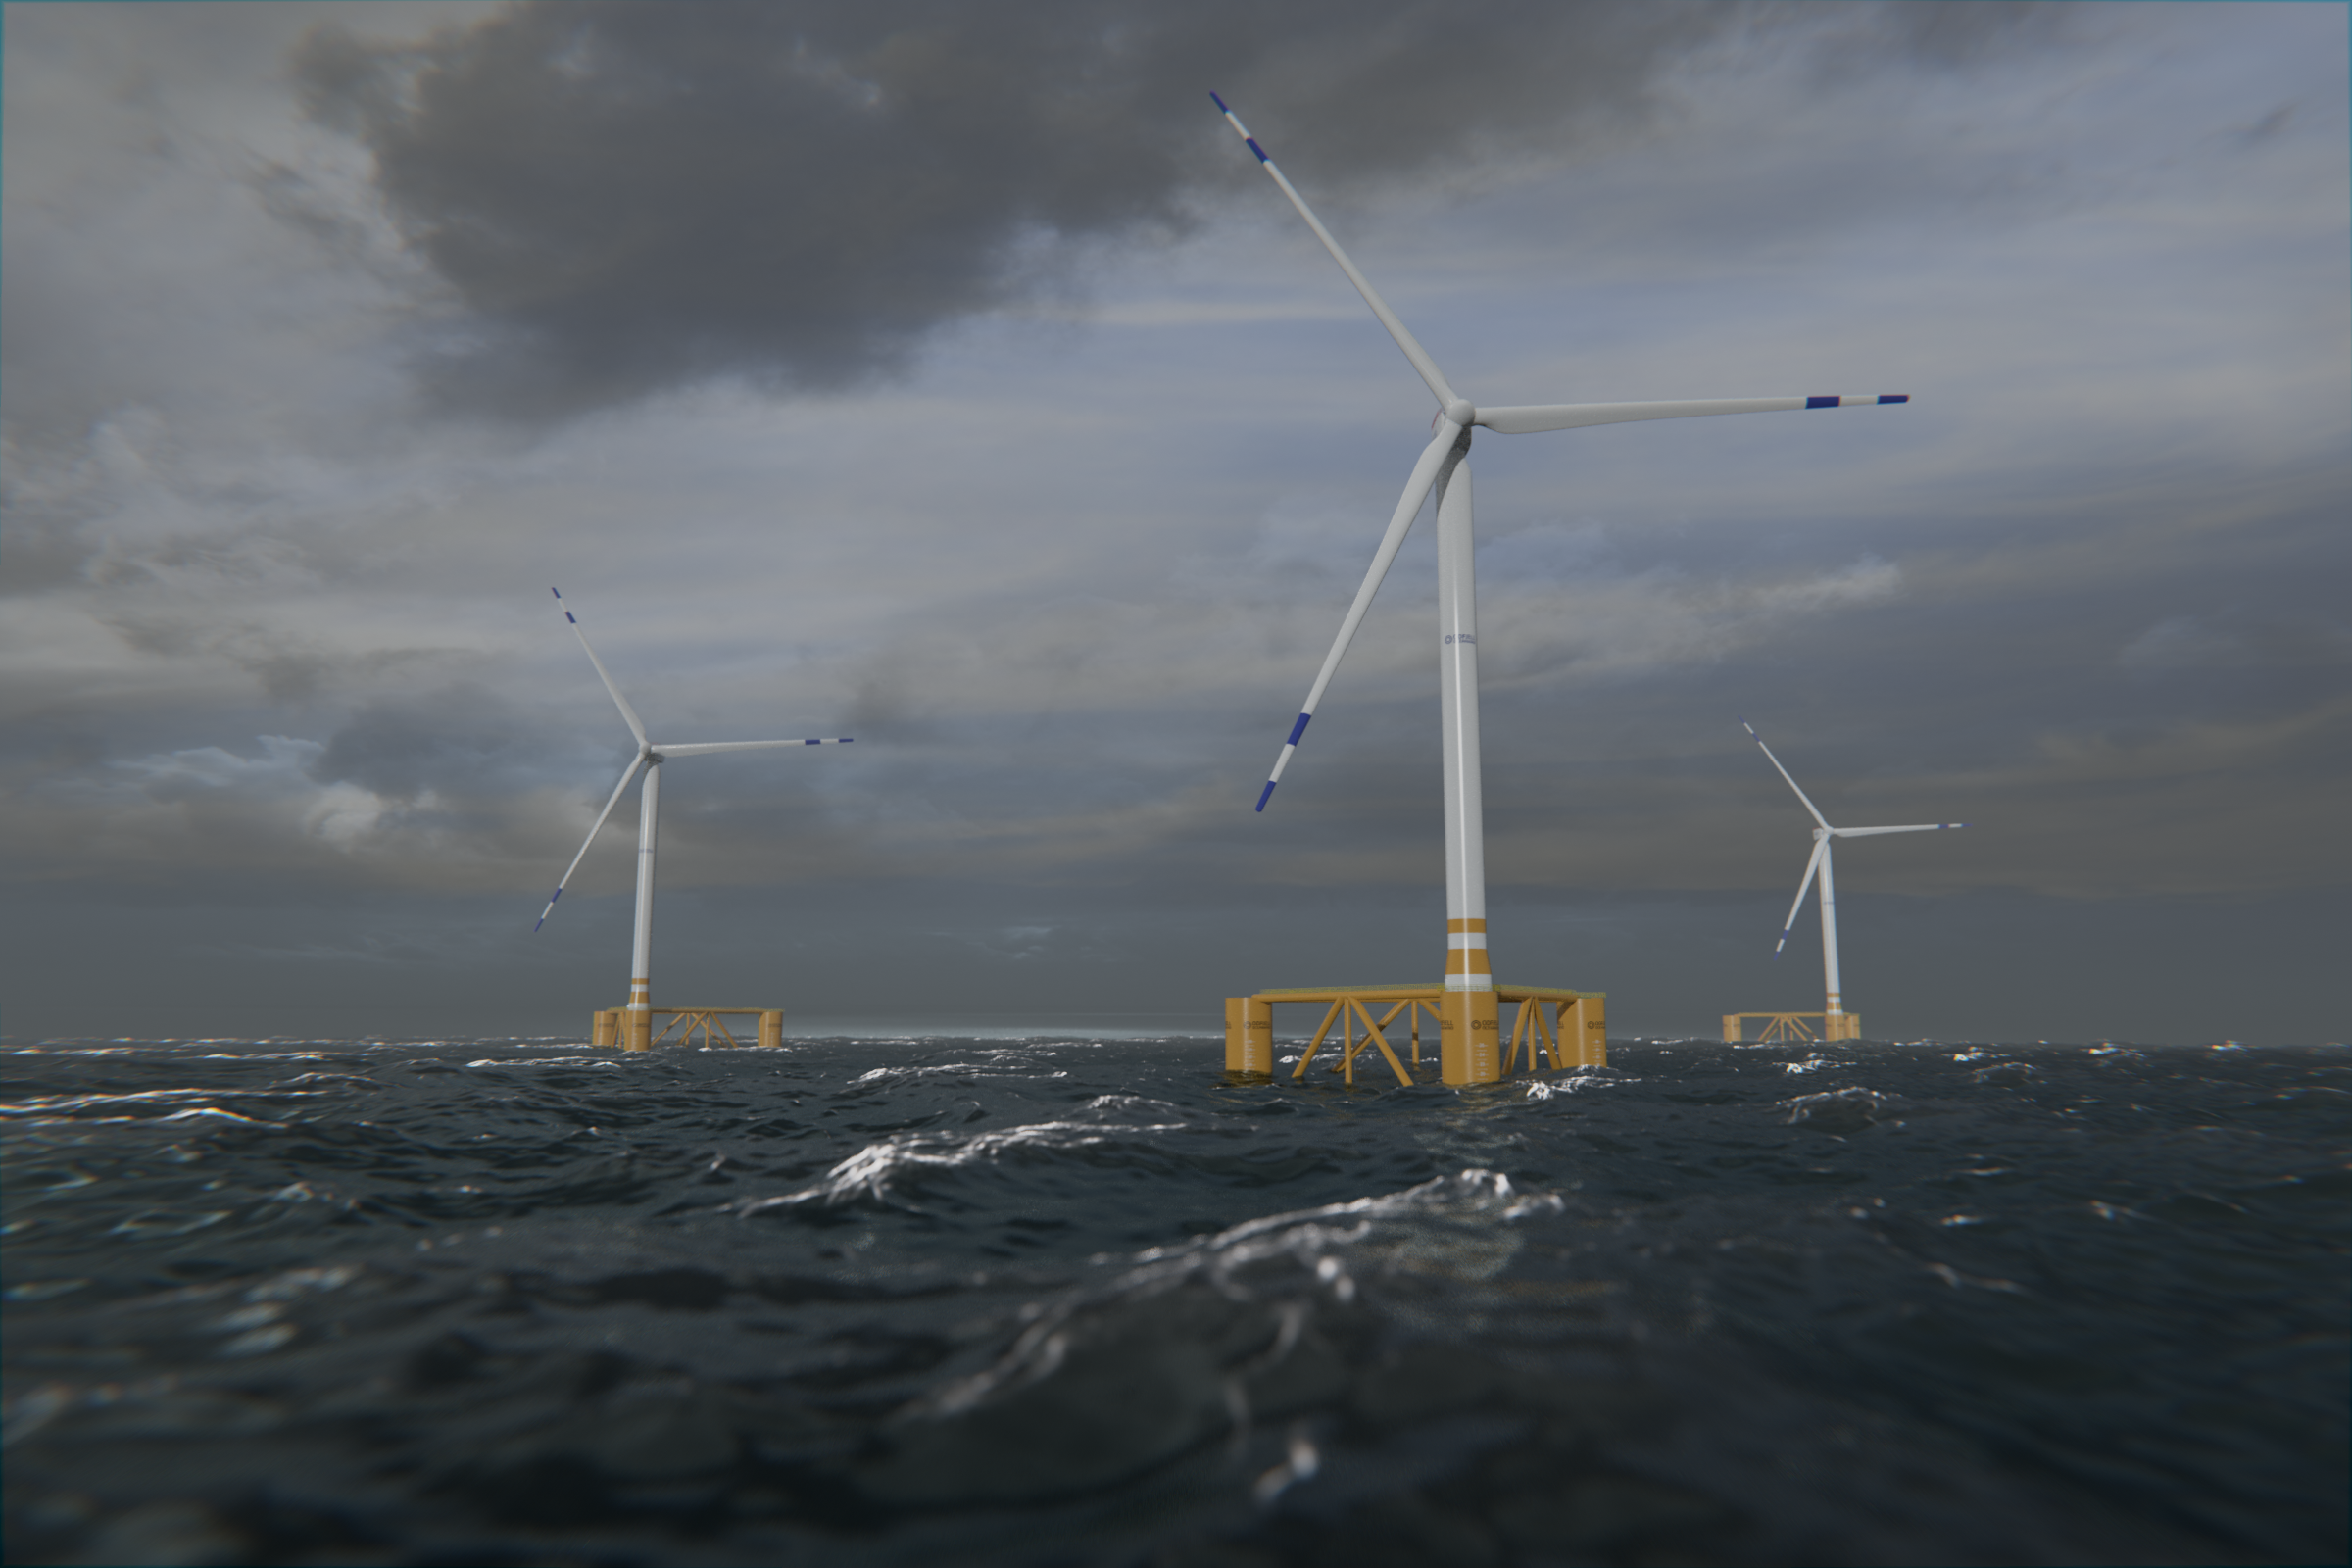 Tax incentives as a catalyst for floating offshore wind de-carbonisation projects?